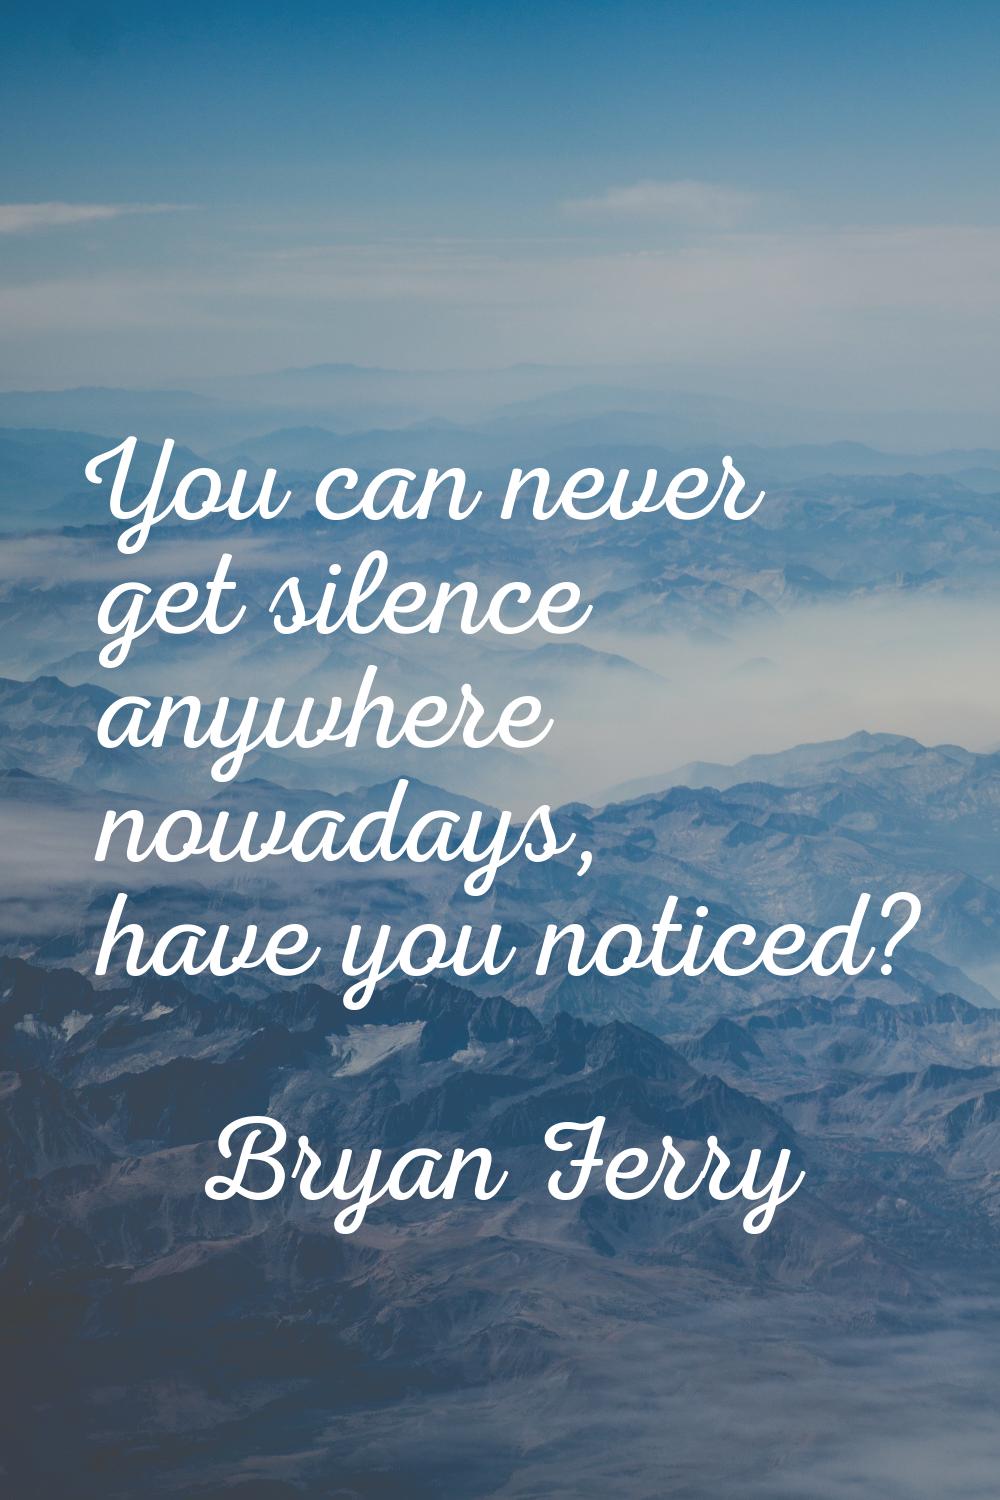 You can never get silence anywhere nowadays, have you noticed?